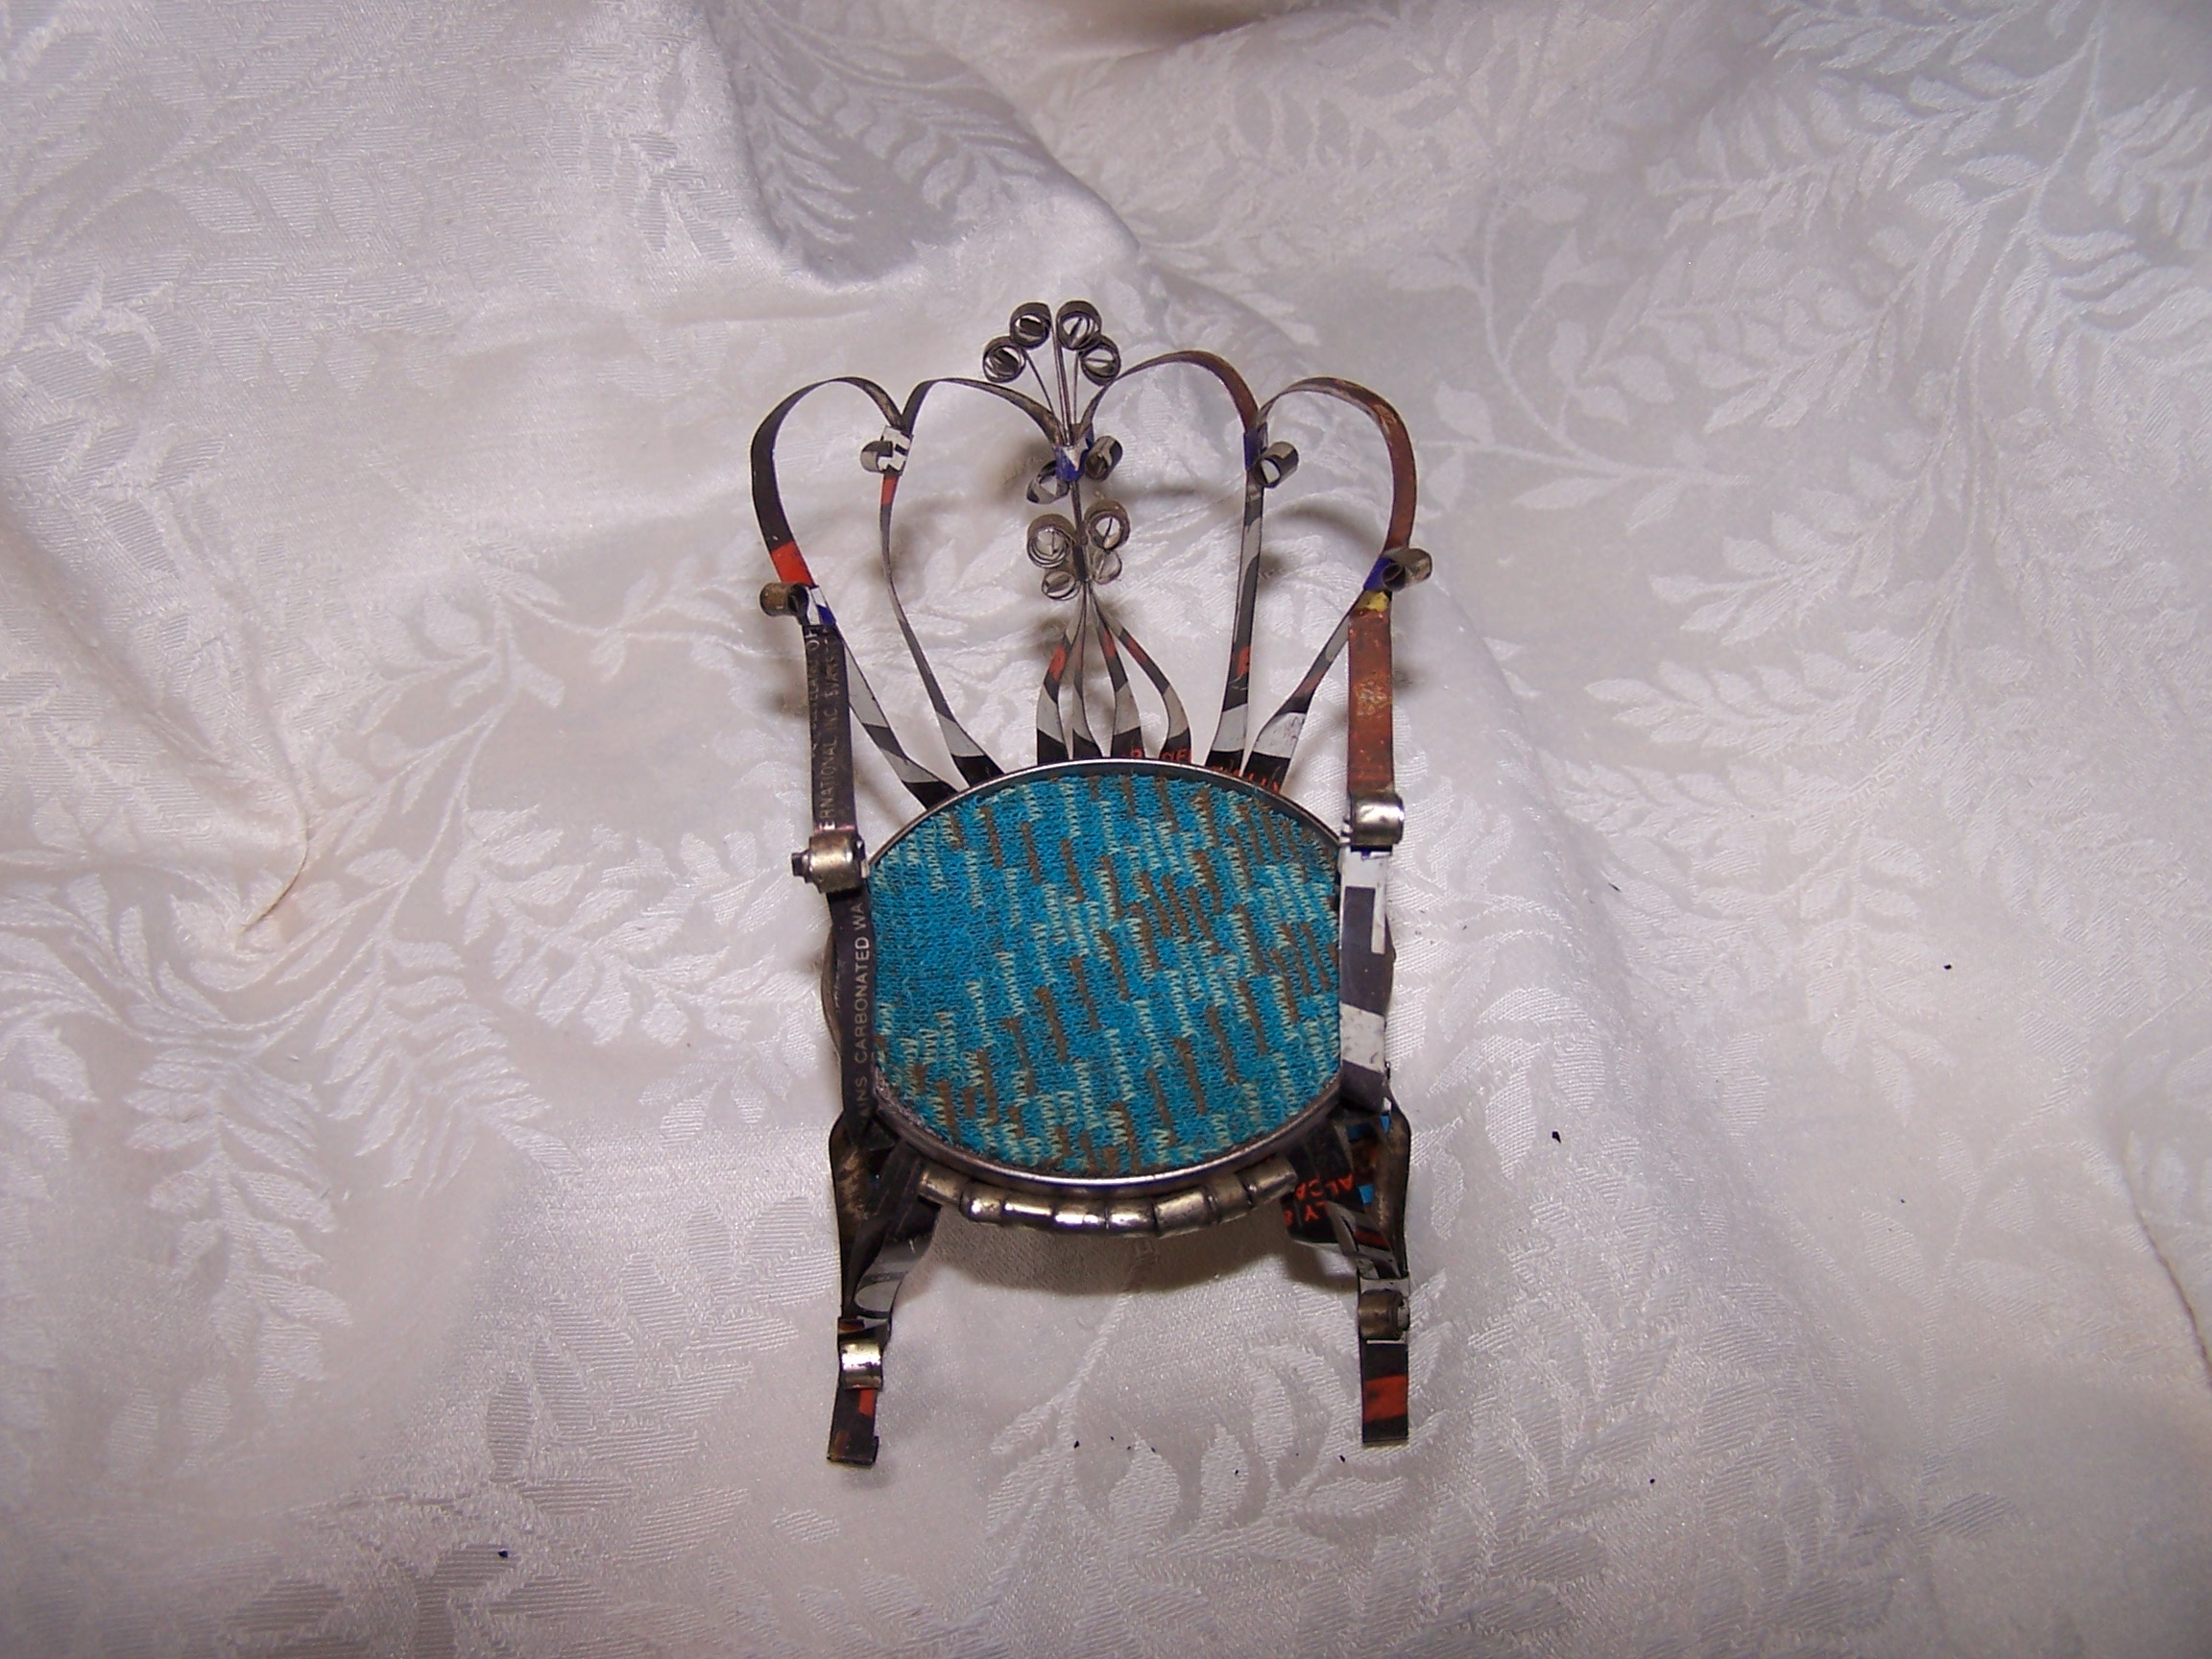 Image 5 of Quilled Rocking Chair, Unpainted, Vintage